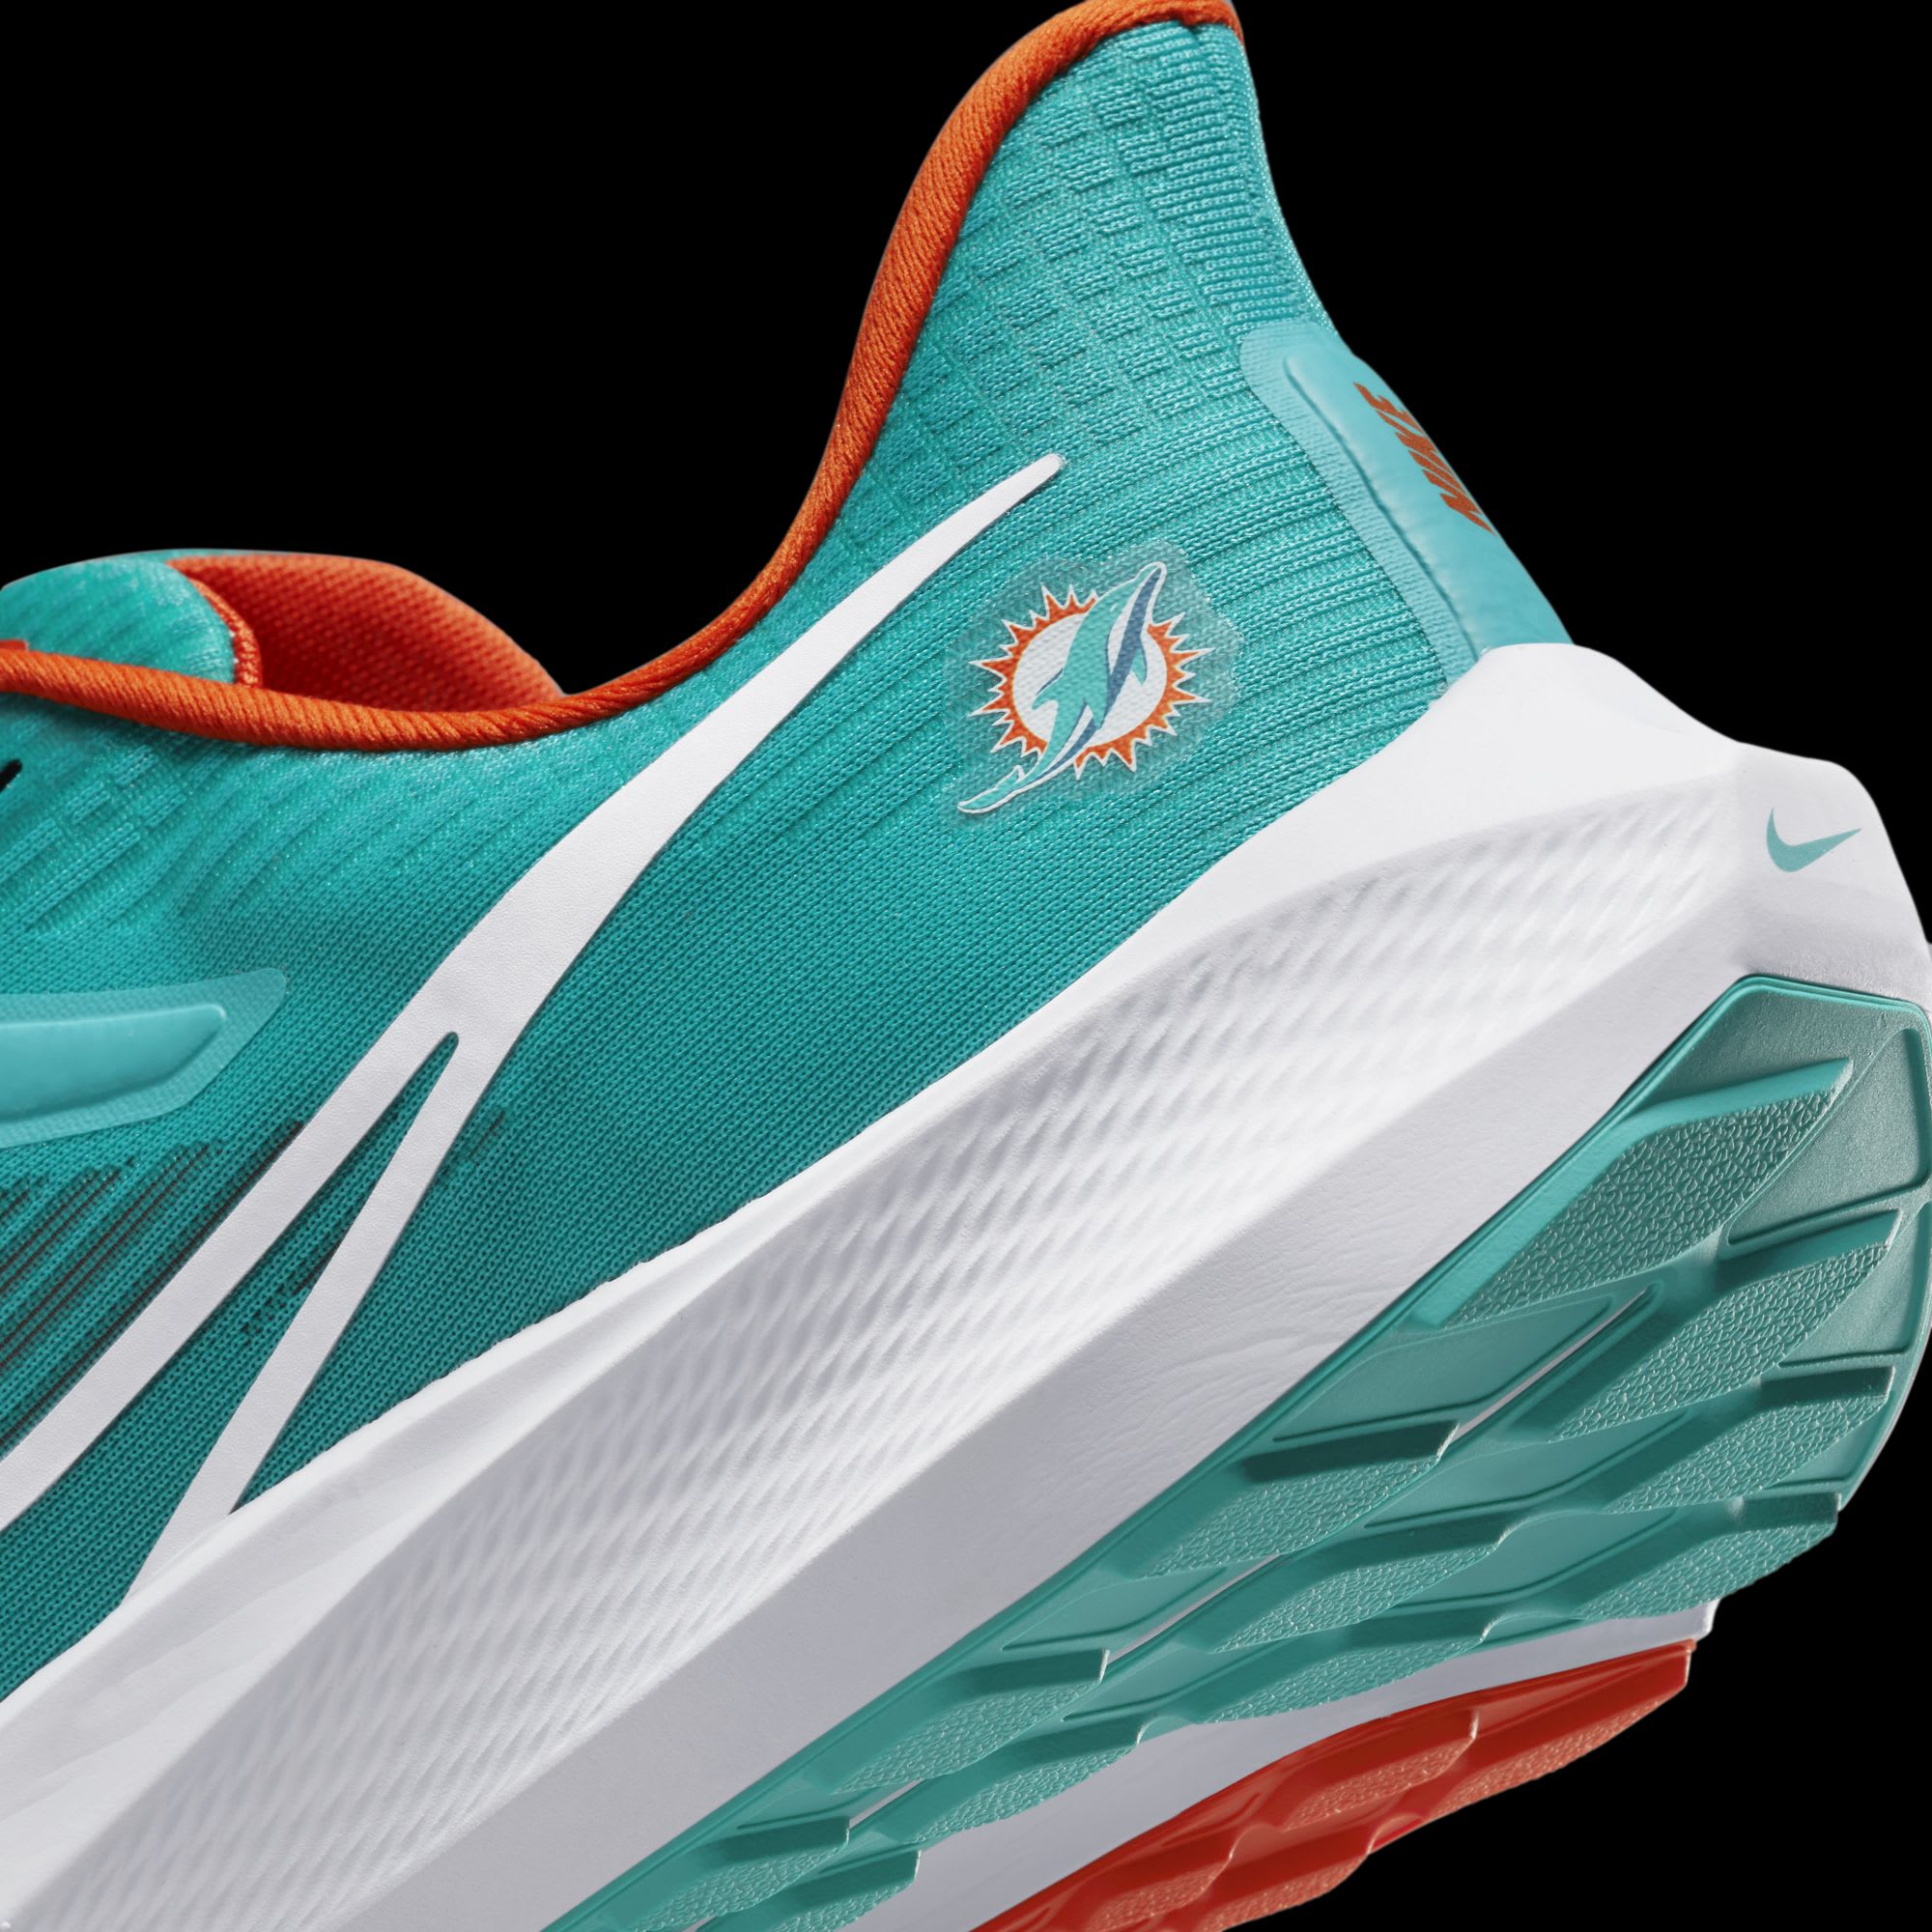 Fans these Dolphins shoes by Nike - Sports